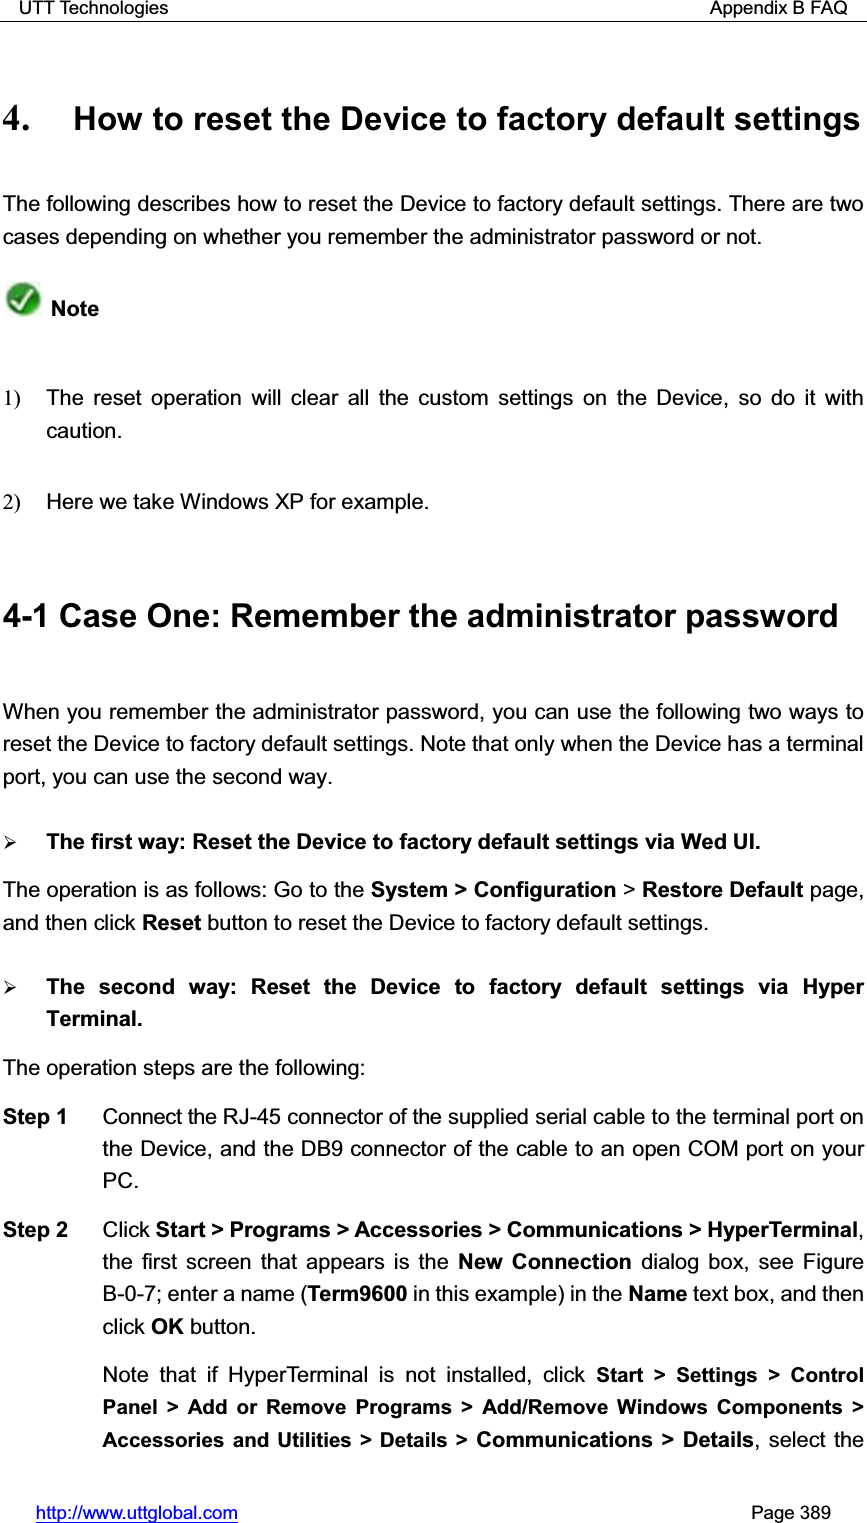 UTT Technologies                                                          Appendix B FAQ http://www.uttglobal.com                                                       Page 389 4. How to reset the Device to factory default settings The following describes how to reset the Device to factory default settings. There are two cases depending on whether you remember the administrator password or not.   Note 1)   The reset operation will clear all the custom settings on the Device, so do it with caution.2)   Here we take Windows XP for example.4-1 Case One: Remember the administrator password When you remember the administrator password, you can use the following two ways to reset the Device to factory default settings. Note that only when the Device has a terminal port, you can use the second way. ¾The first way: Reset the Device to factory default settings via Wed UI. The operation is as follows: Go to the System &gt; Configuration &gt; Restore Default page, and then click Reset button to reset the Device to factory default settings. ¾The second way: Reset the Device to factory default settings via Hyper Terminal. The operation steps are the following:   Step 1  Connect the RJ-45 connector of the supplied serial cable to the terminal port on the Device, and the DB9 connector of the cable to an open COM port on your PC. Step 2  Click Start &gt; Programs &gt; Accessories &gt; Communications &gt; HyperTerminal,the first screen that appears is the New Connection dialog box, see Figure B-0-7; enter a name (Term9600 in this example) in the Name text box, and thenclick OK button.  Note that if HyperTerminal is not installed, click Start &gt; Settings &gt; Control Panel &gt; Add or Remove Programs &gt; Add/Remove Windows Components &gt; Accessories and Utilities &gt; Details &gt; Communications &gt; Details, select the 